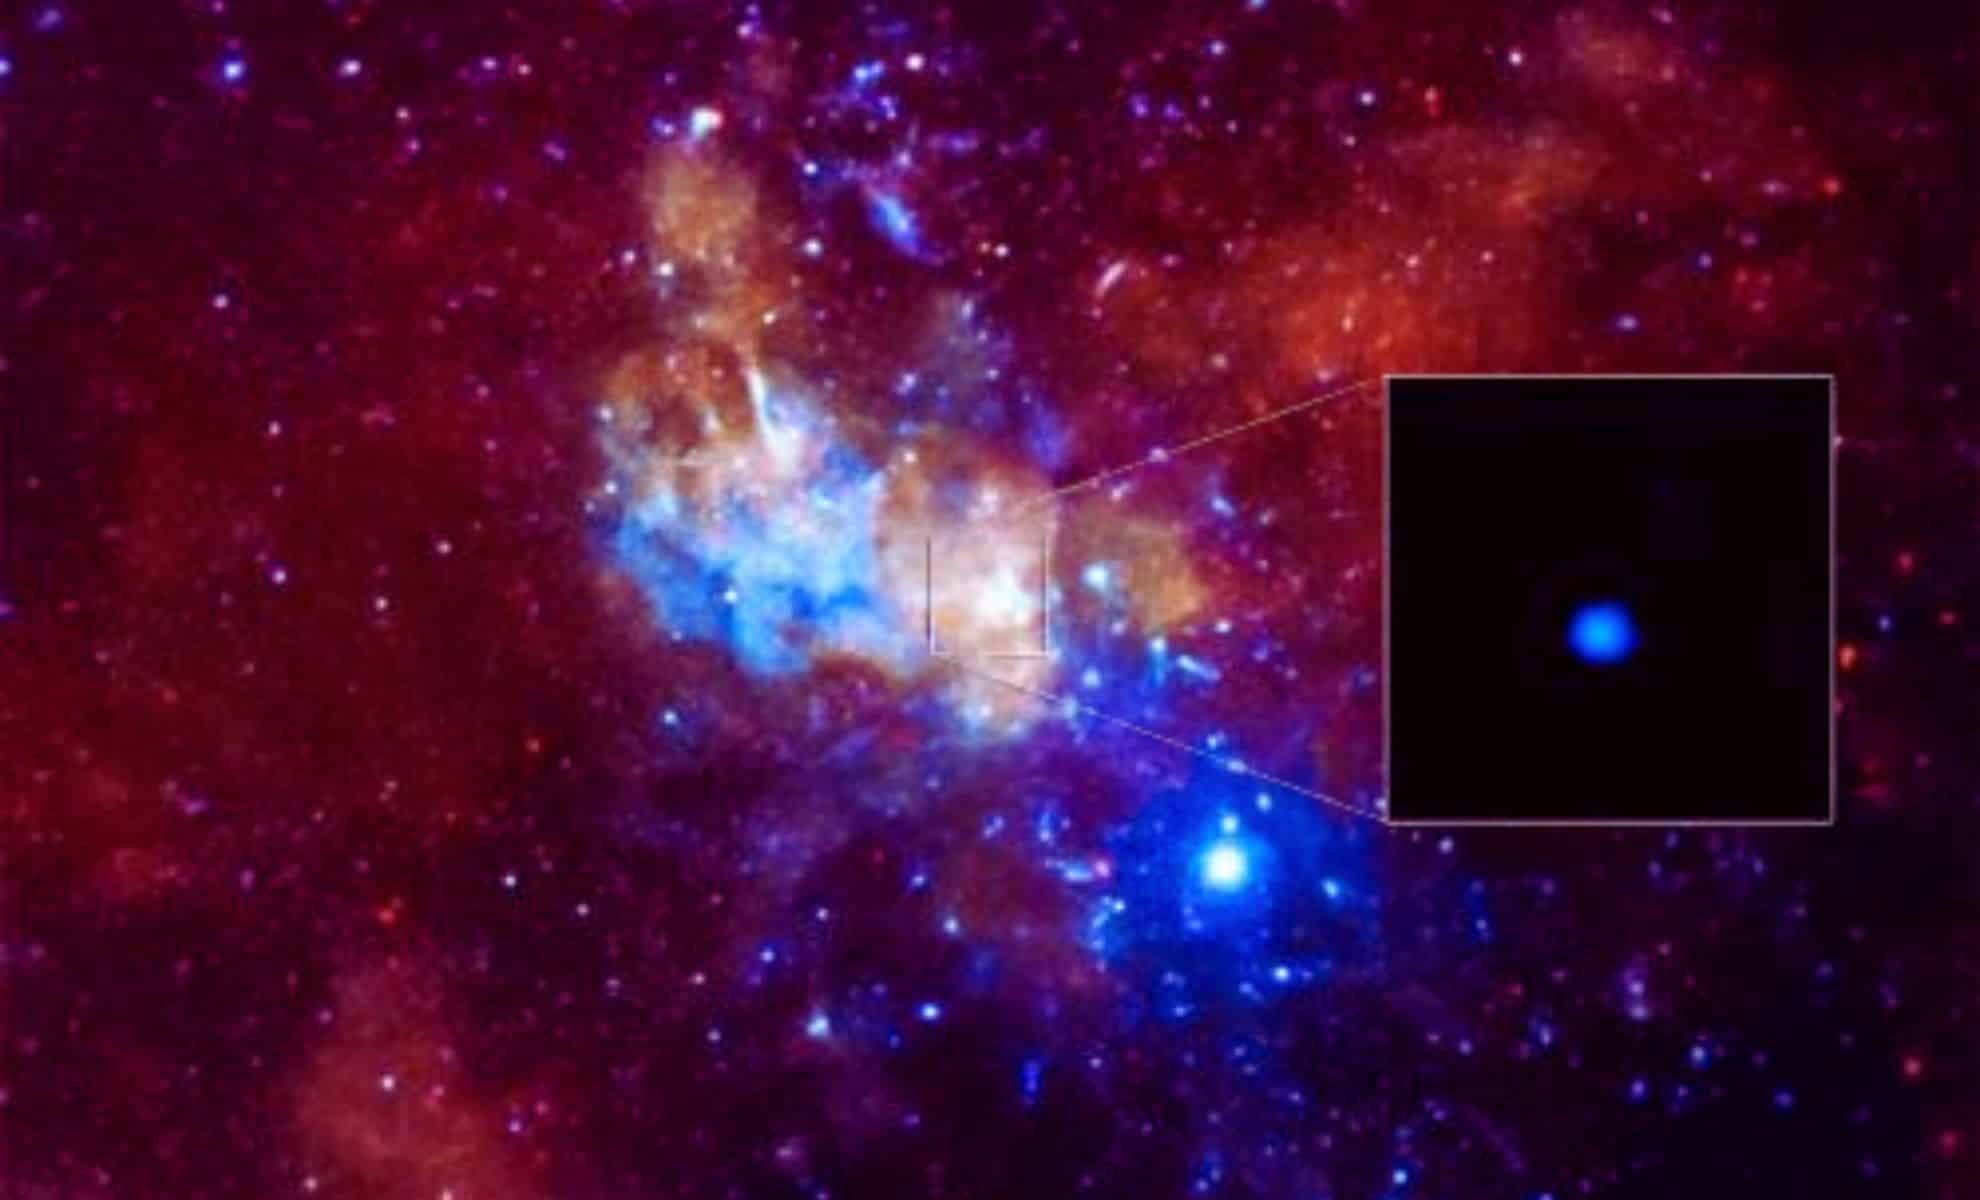 NASA's Chandra spacecraft detects eruption of supermassive black hole at the core of the Milky Way